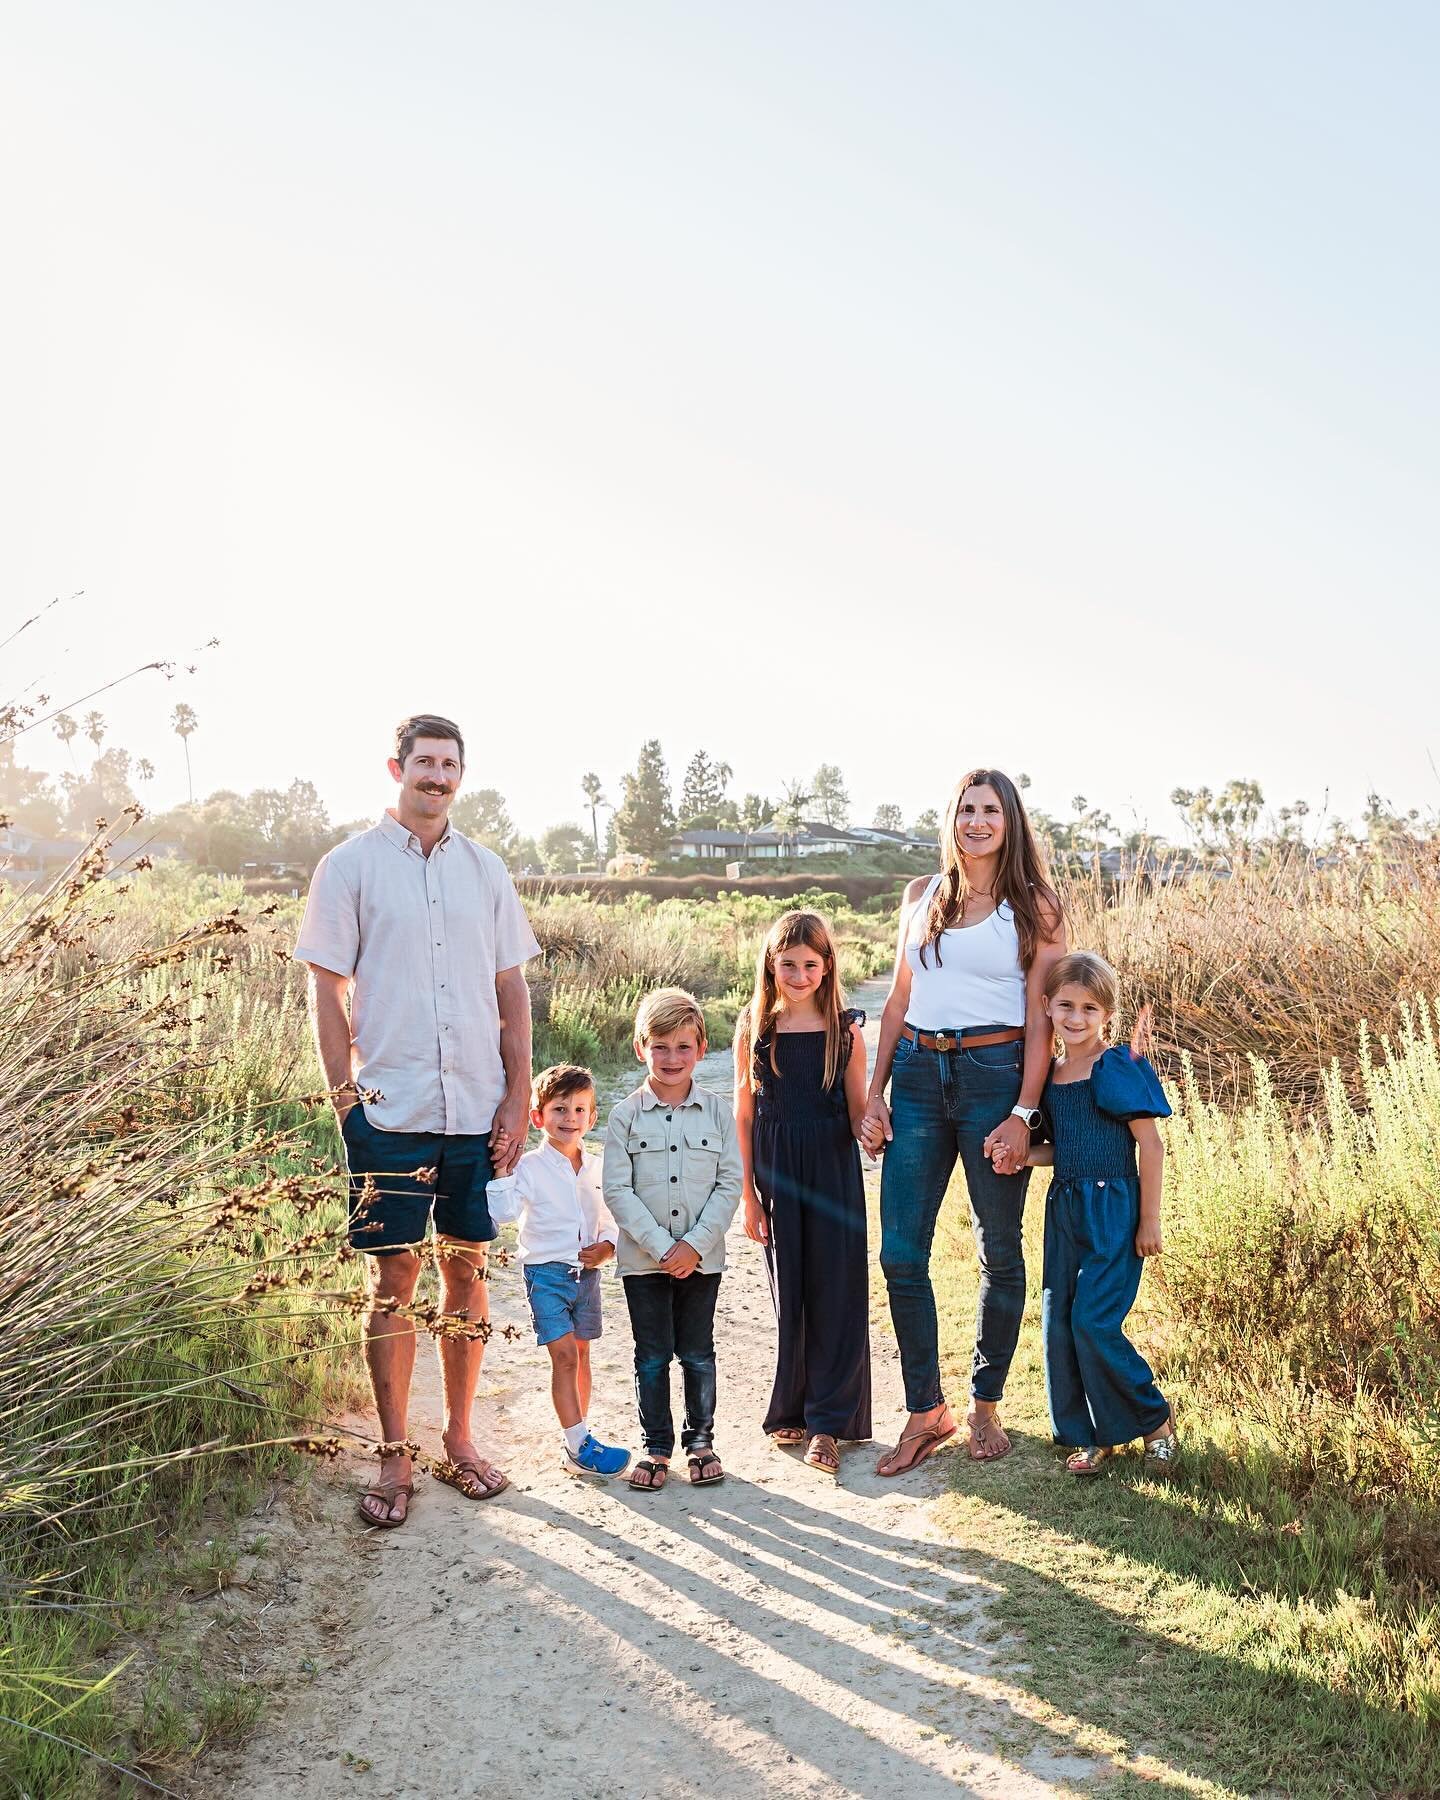 Meet the owners! Hello we are the Bertolucci family. We love all things outdoors, which is one reason we were so drawn to the property at Centaur Farms. The trees, flowers and fields make this venue an exceptional place for photos and gatherings. We 